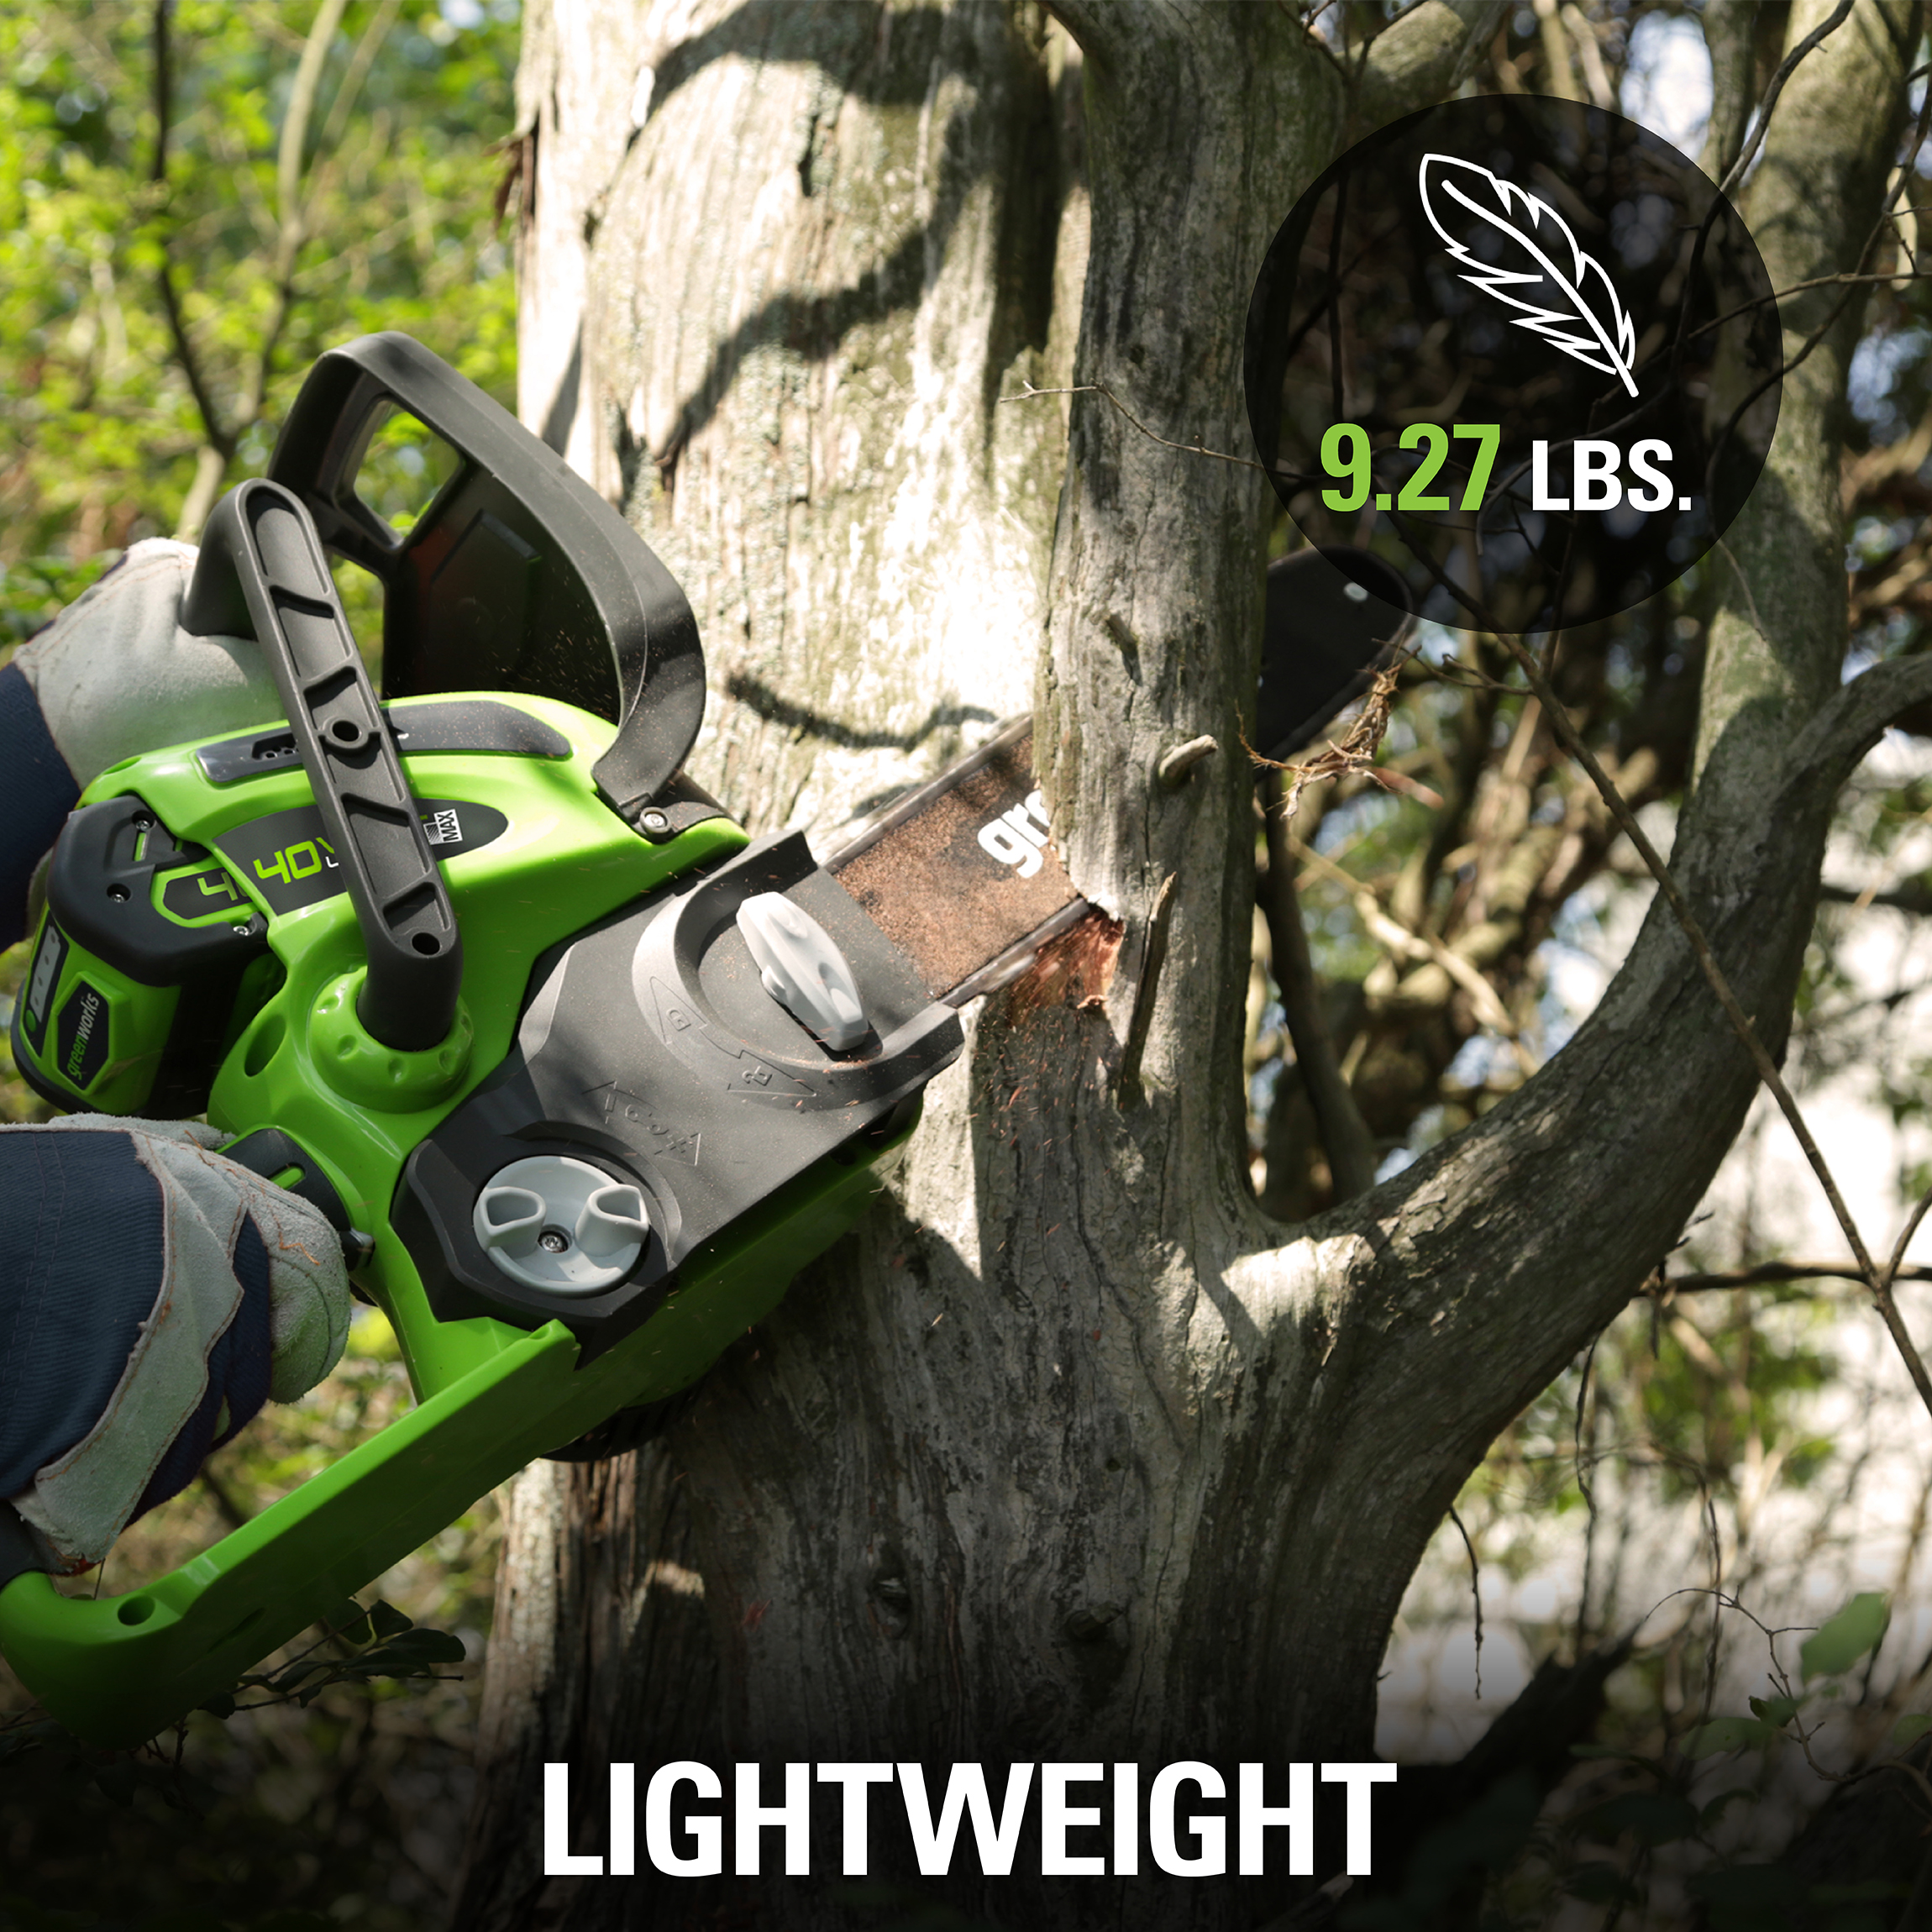 GreenWorks 20292 40V 12" Cordless Chainsaw, Battery and Charger Sold Separately - image 13 of 14